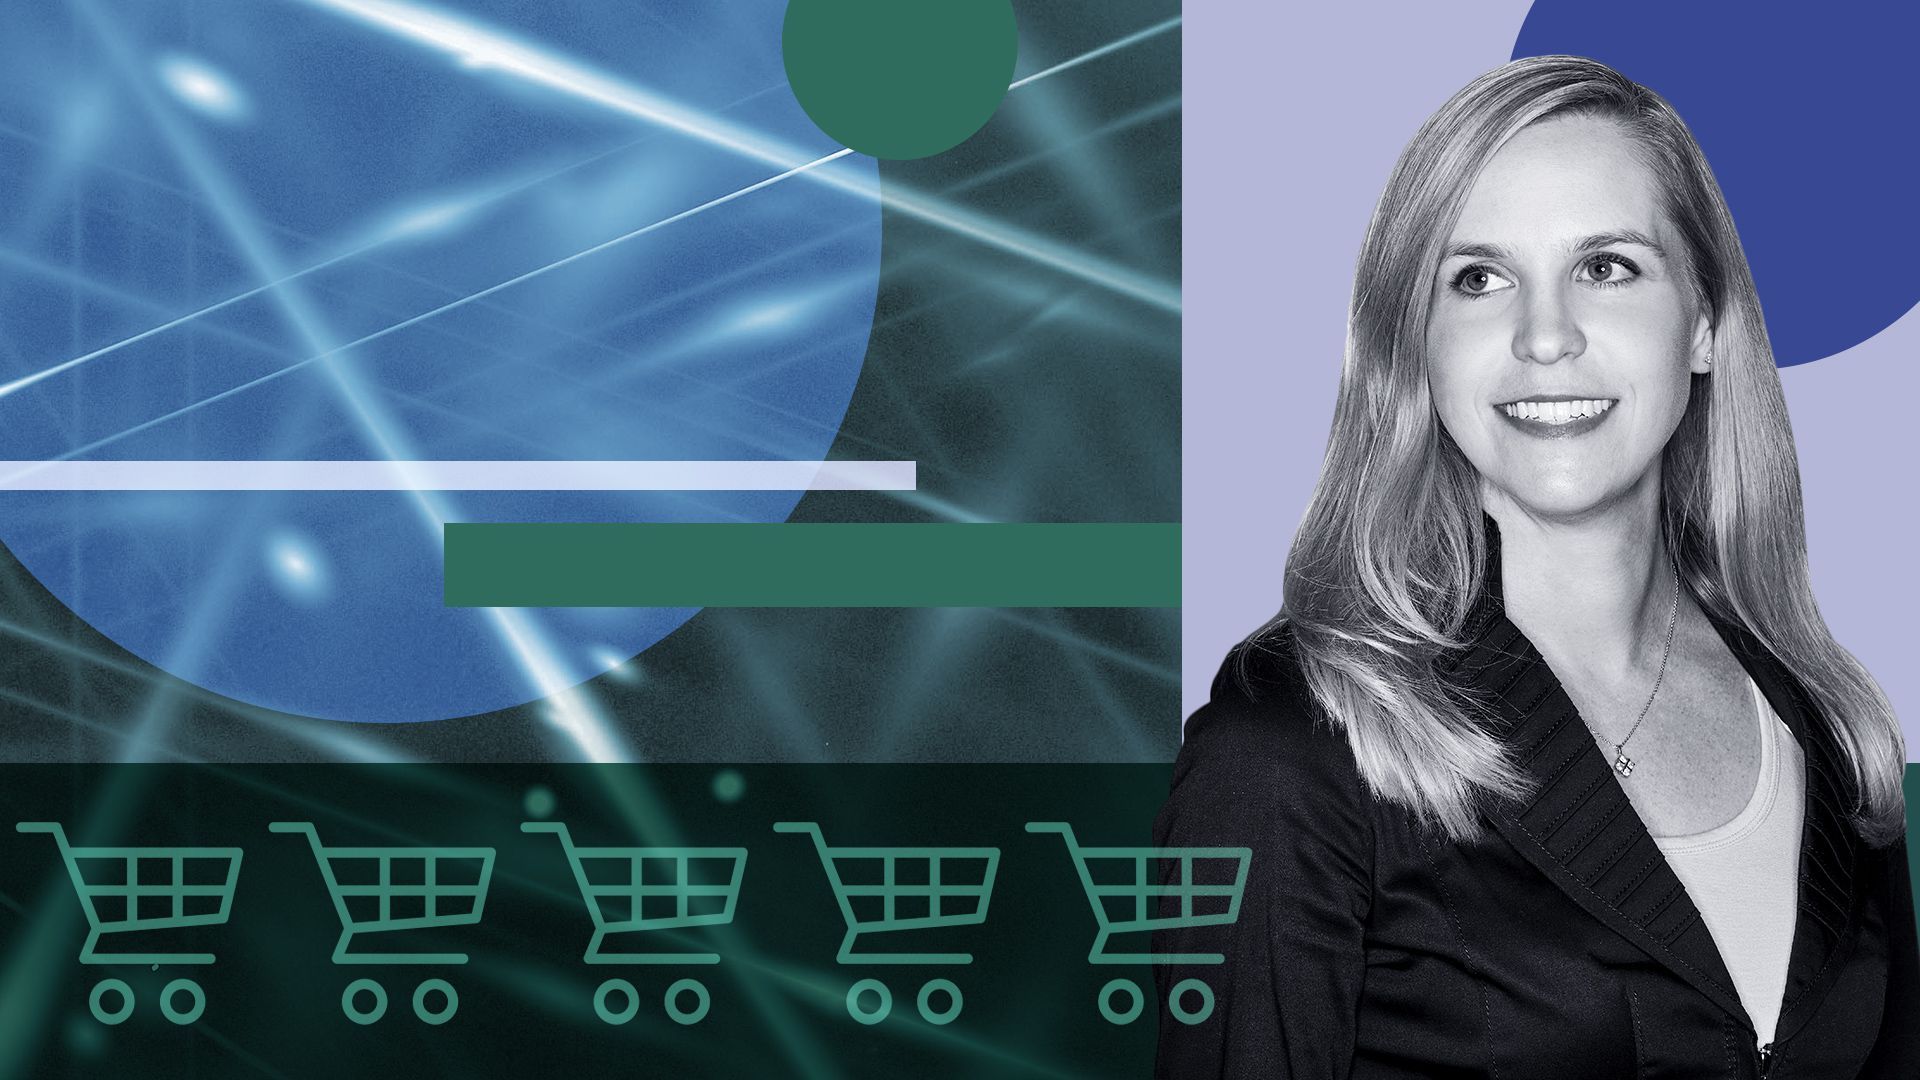 Photo illustration of Carrie Tharp with abstract shapes and shopping carts.